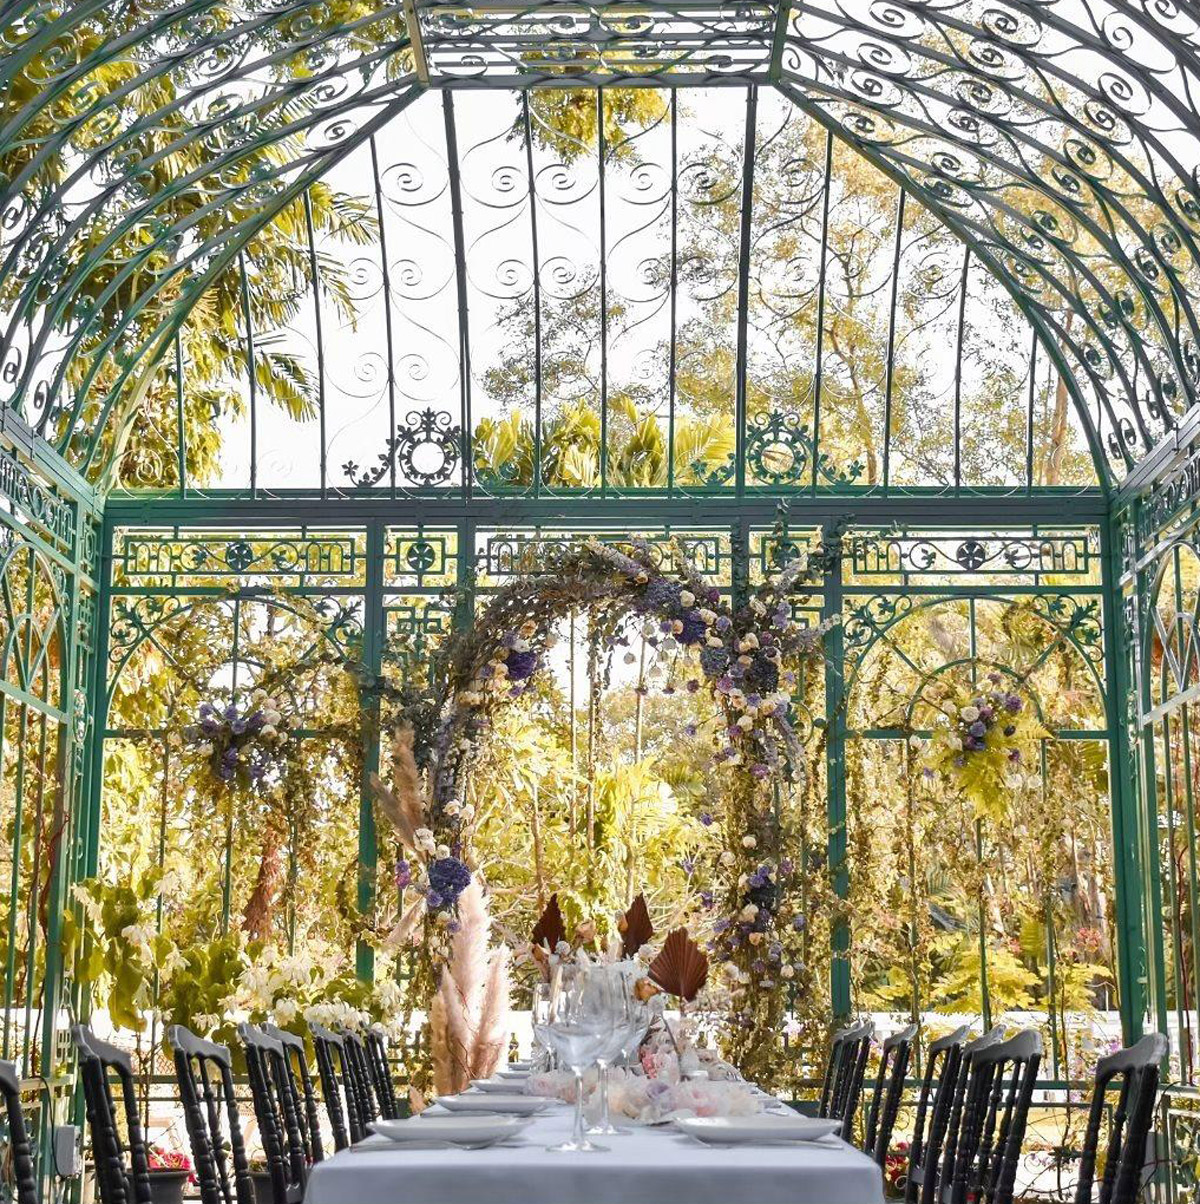 4 Wedding Photoshoot Locations That Will Keep Your Wanderlust Satiated